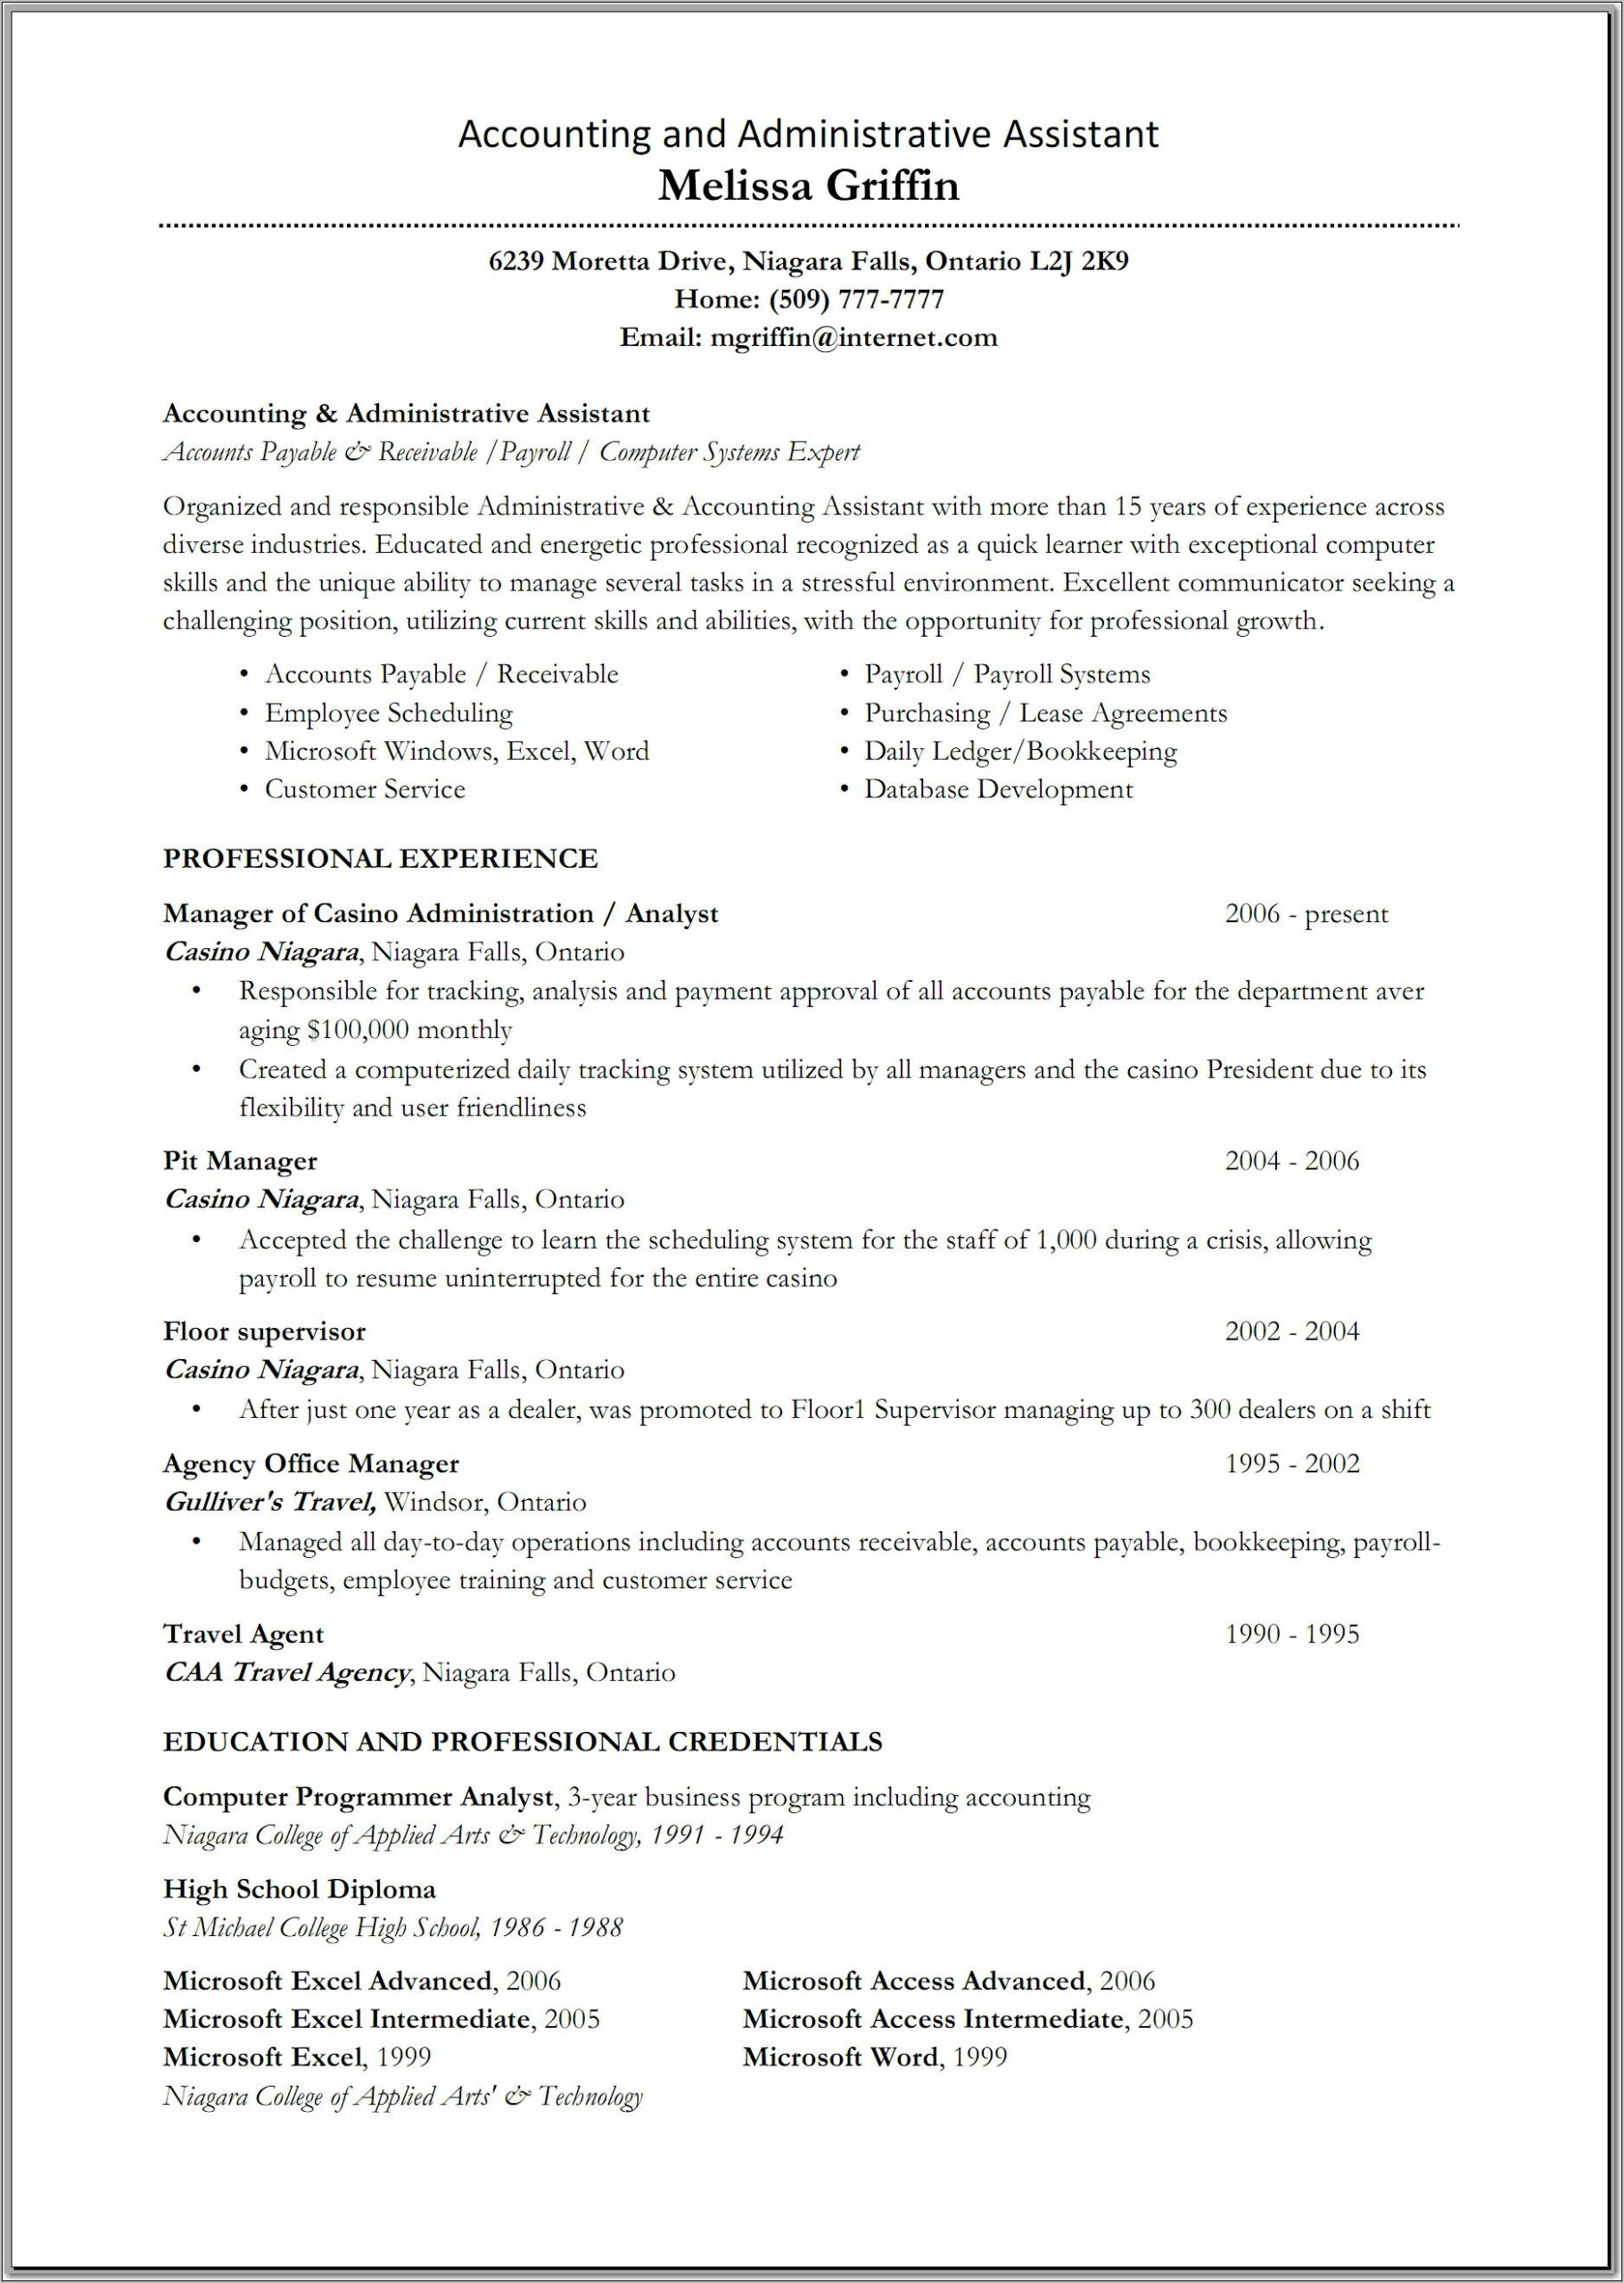 Resume Templates For Accounts Assistant